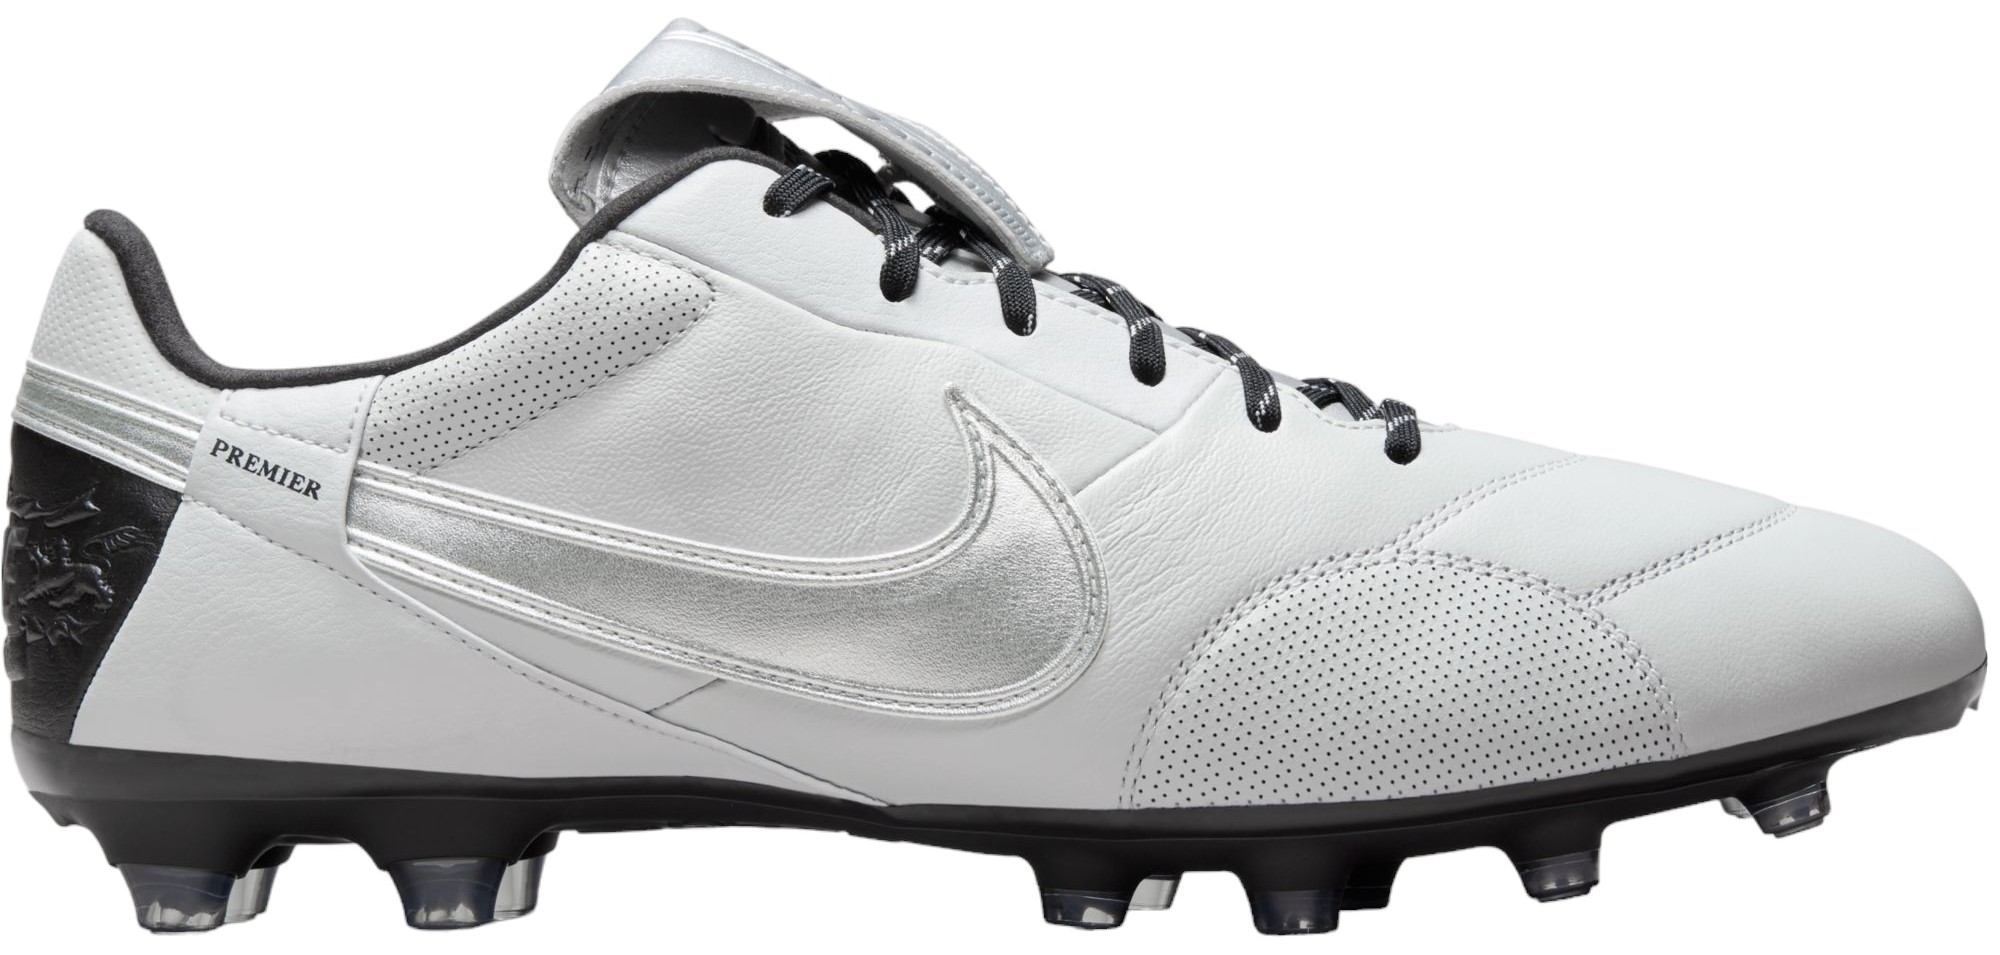 nike the premier iii fg 712086 at5889 006